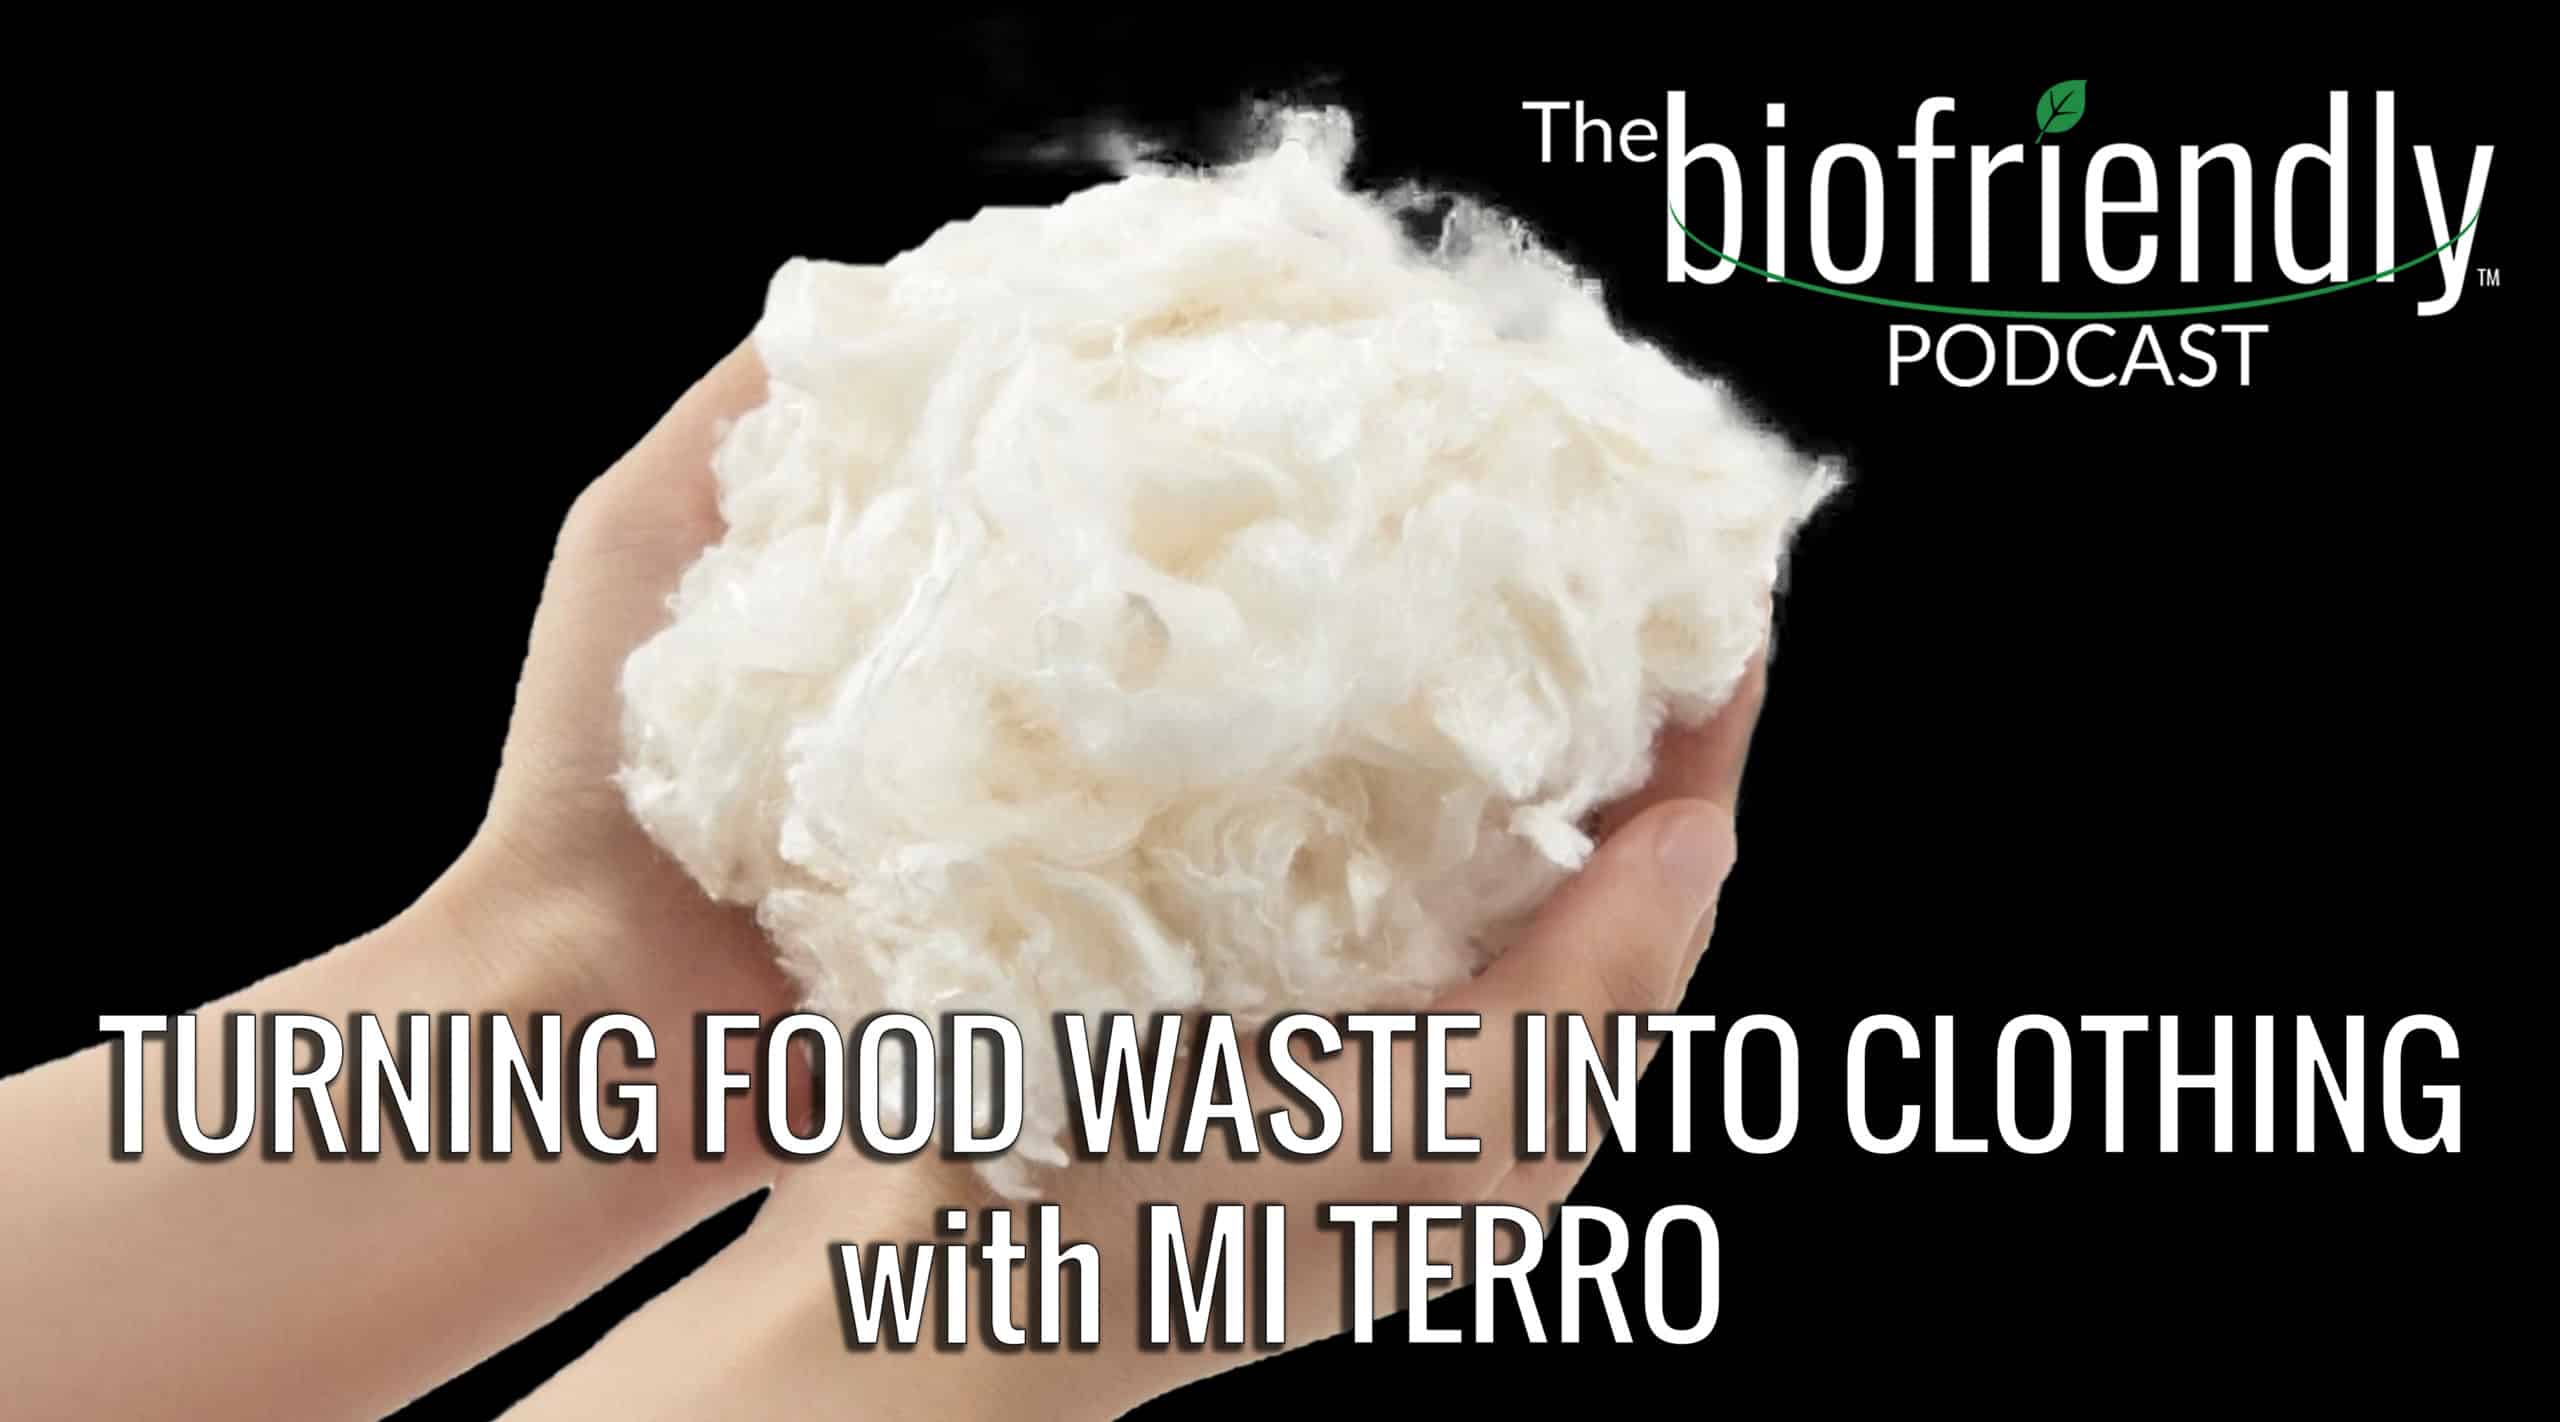 The Biofriendly Podcast - Episode 71 - Turning Food Waste Into Clothing with Mi Terro